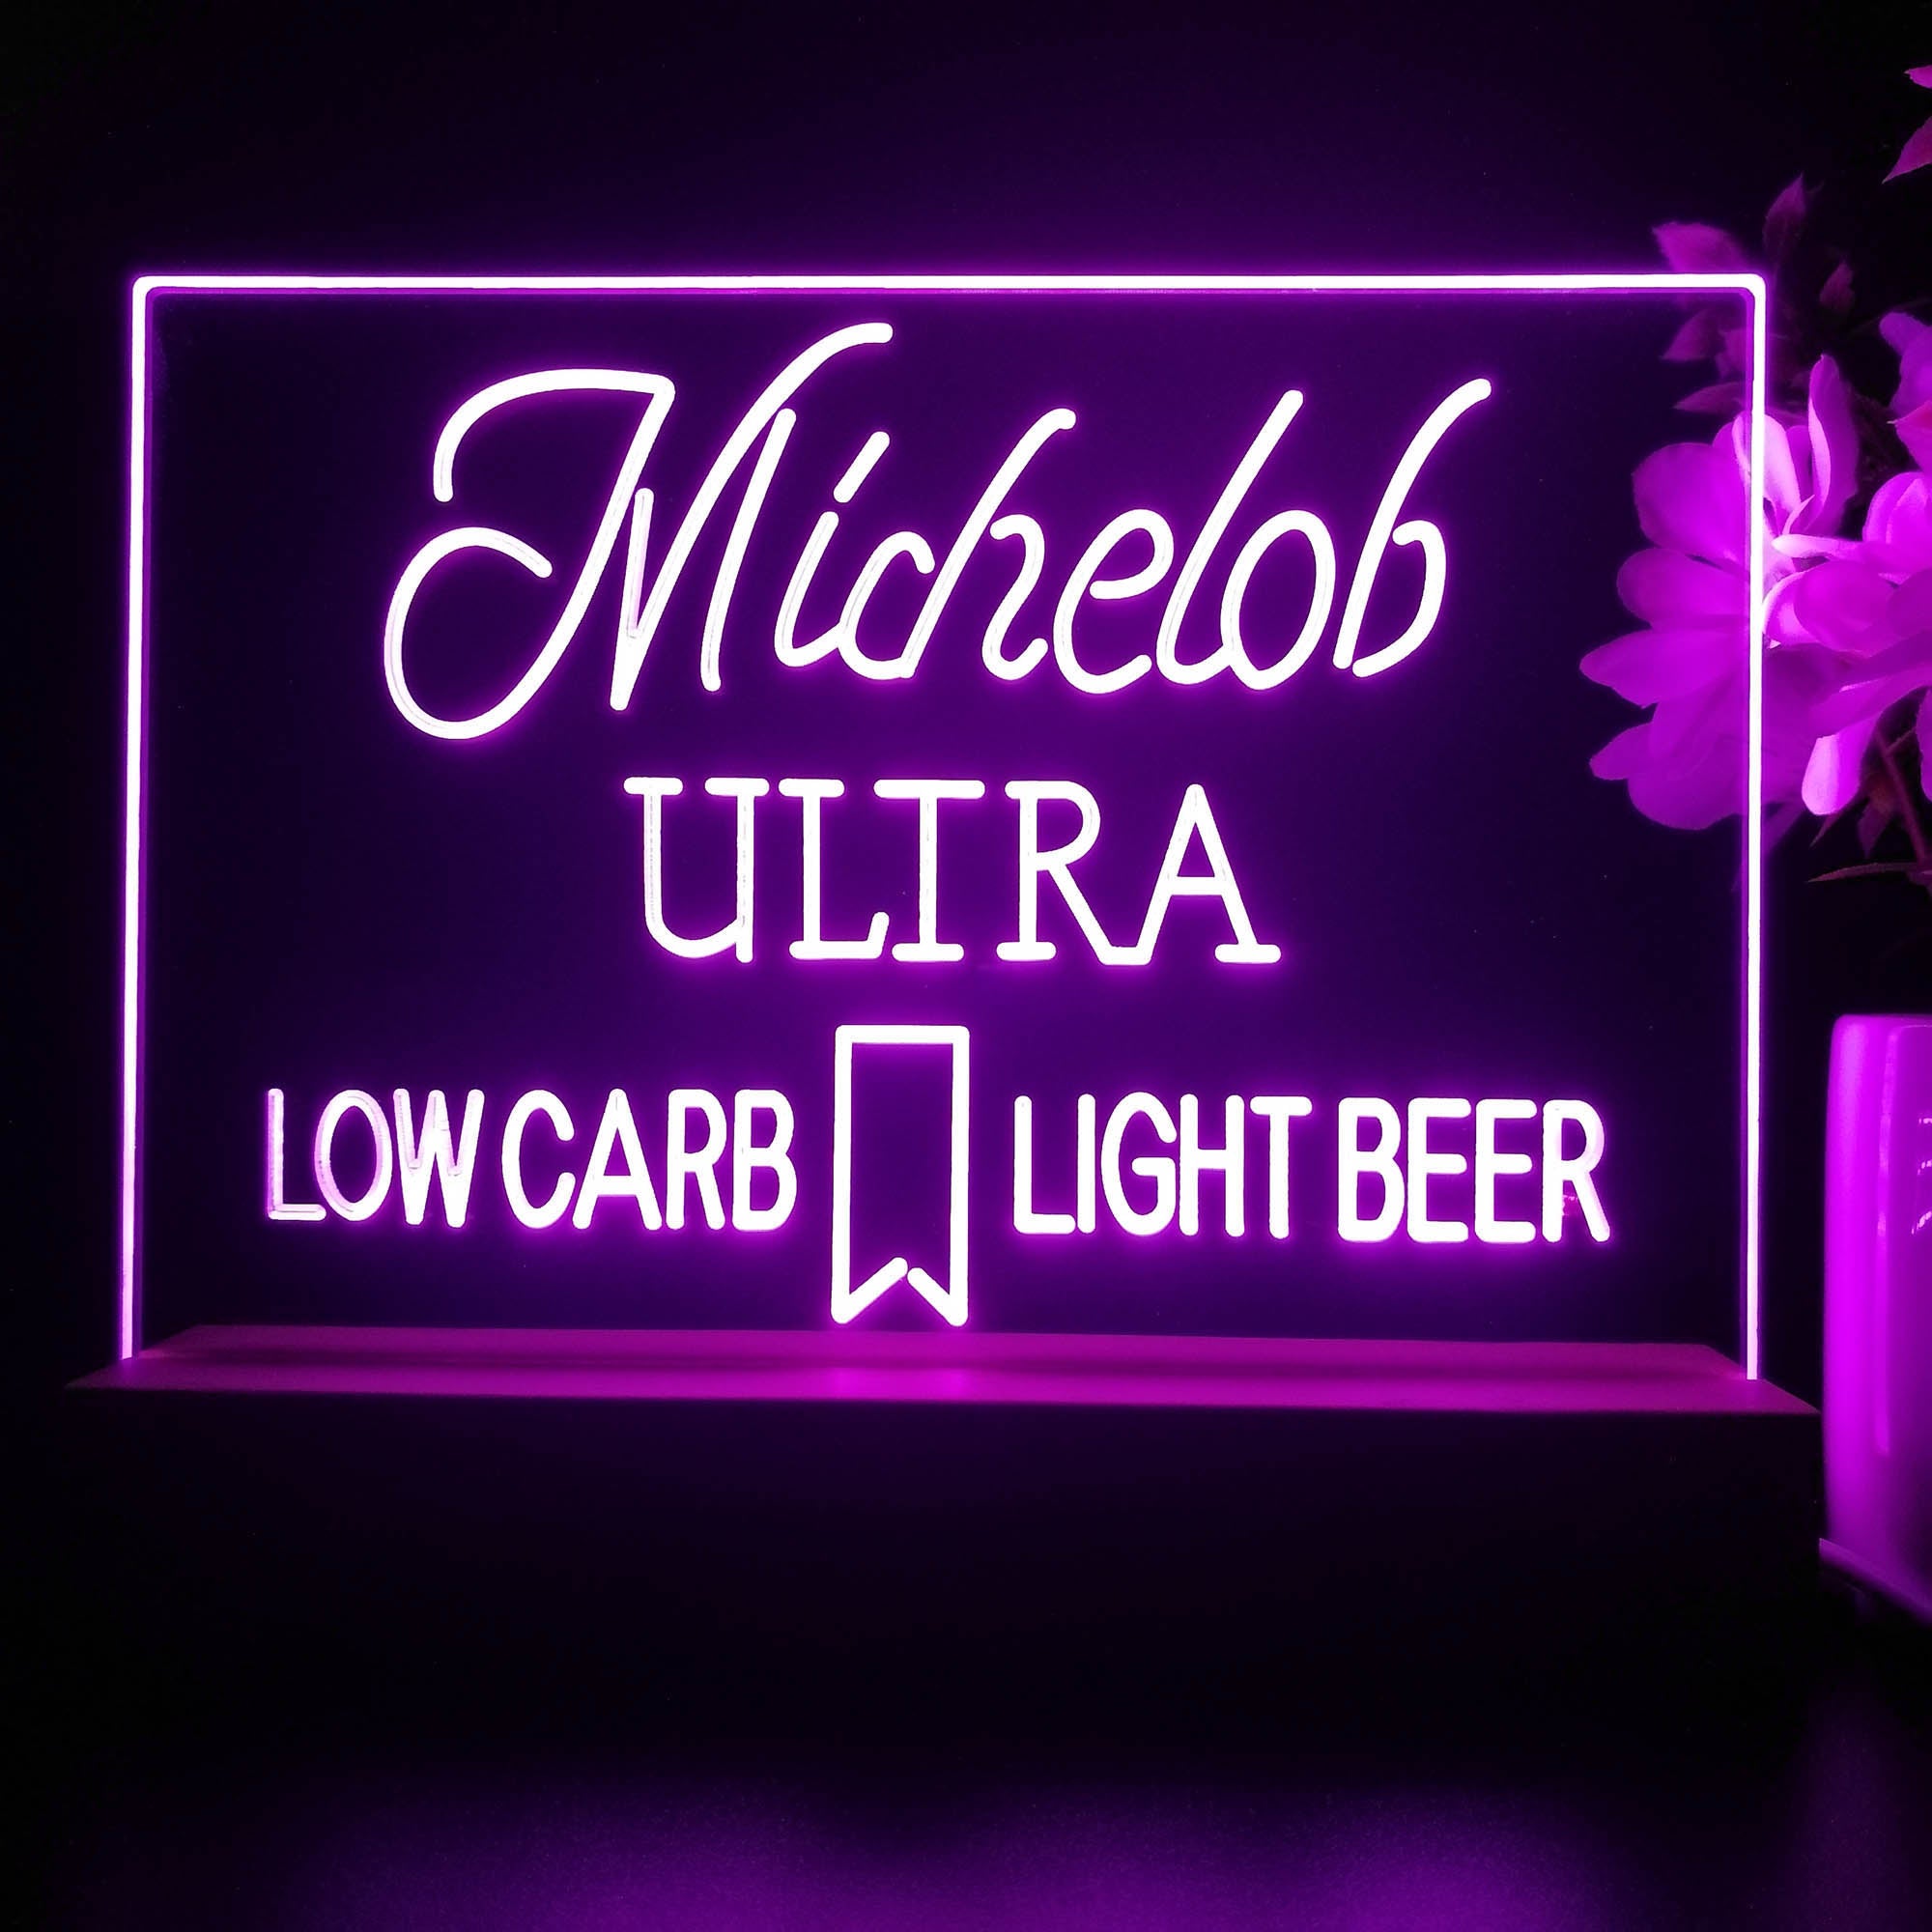 Michelob Ultra Low Carb Light Beer Neon Sign Pub Bar Lamp